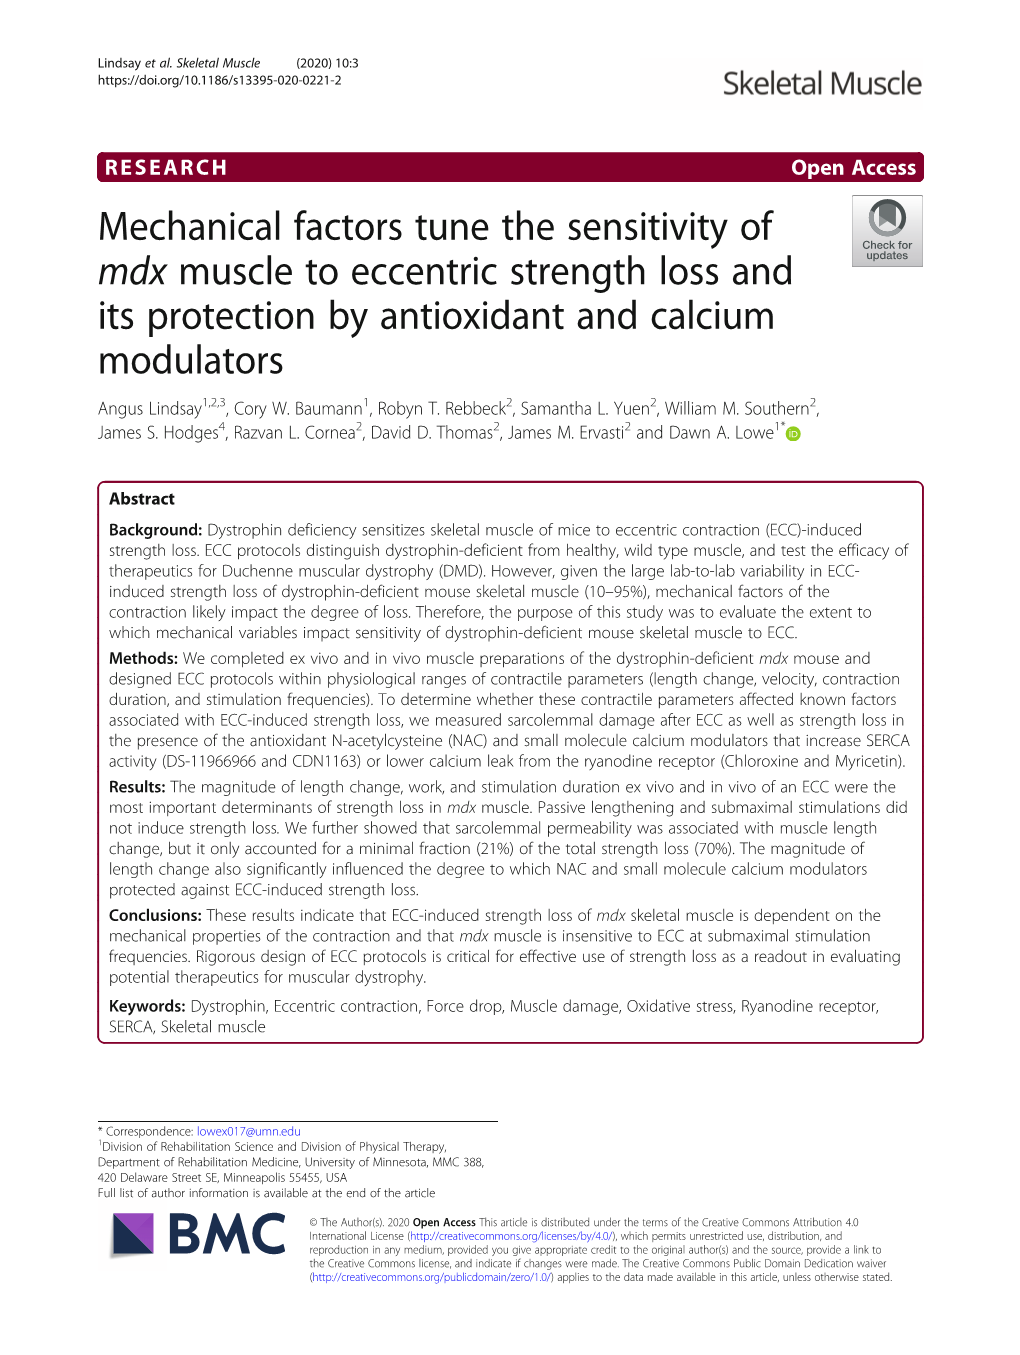 Mechanical Factors Tune the Sensitivity of Mdx Muscle to Eccentric Strength Loss and Its Protection by Antioxidant and Calcium Modulators Angus Lindsay1,2,3, Cory W